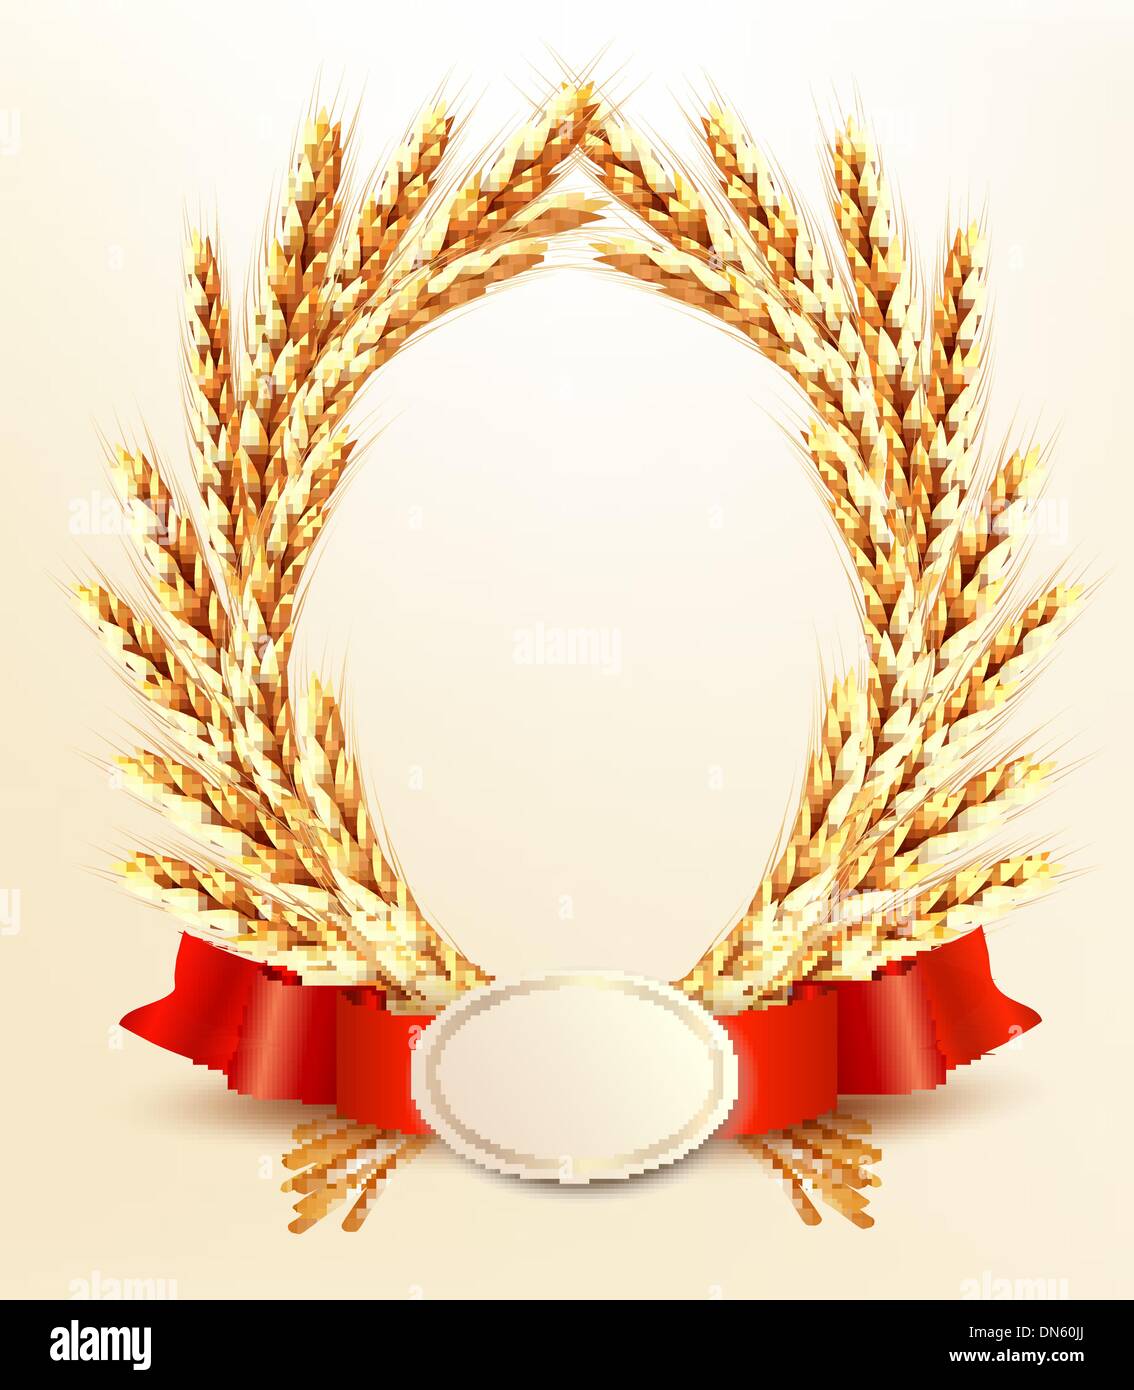 Ripe yellow wheat ears with red ribbons. Vector background Stock Vector